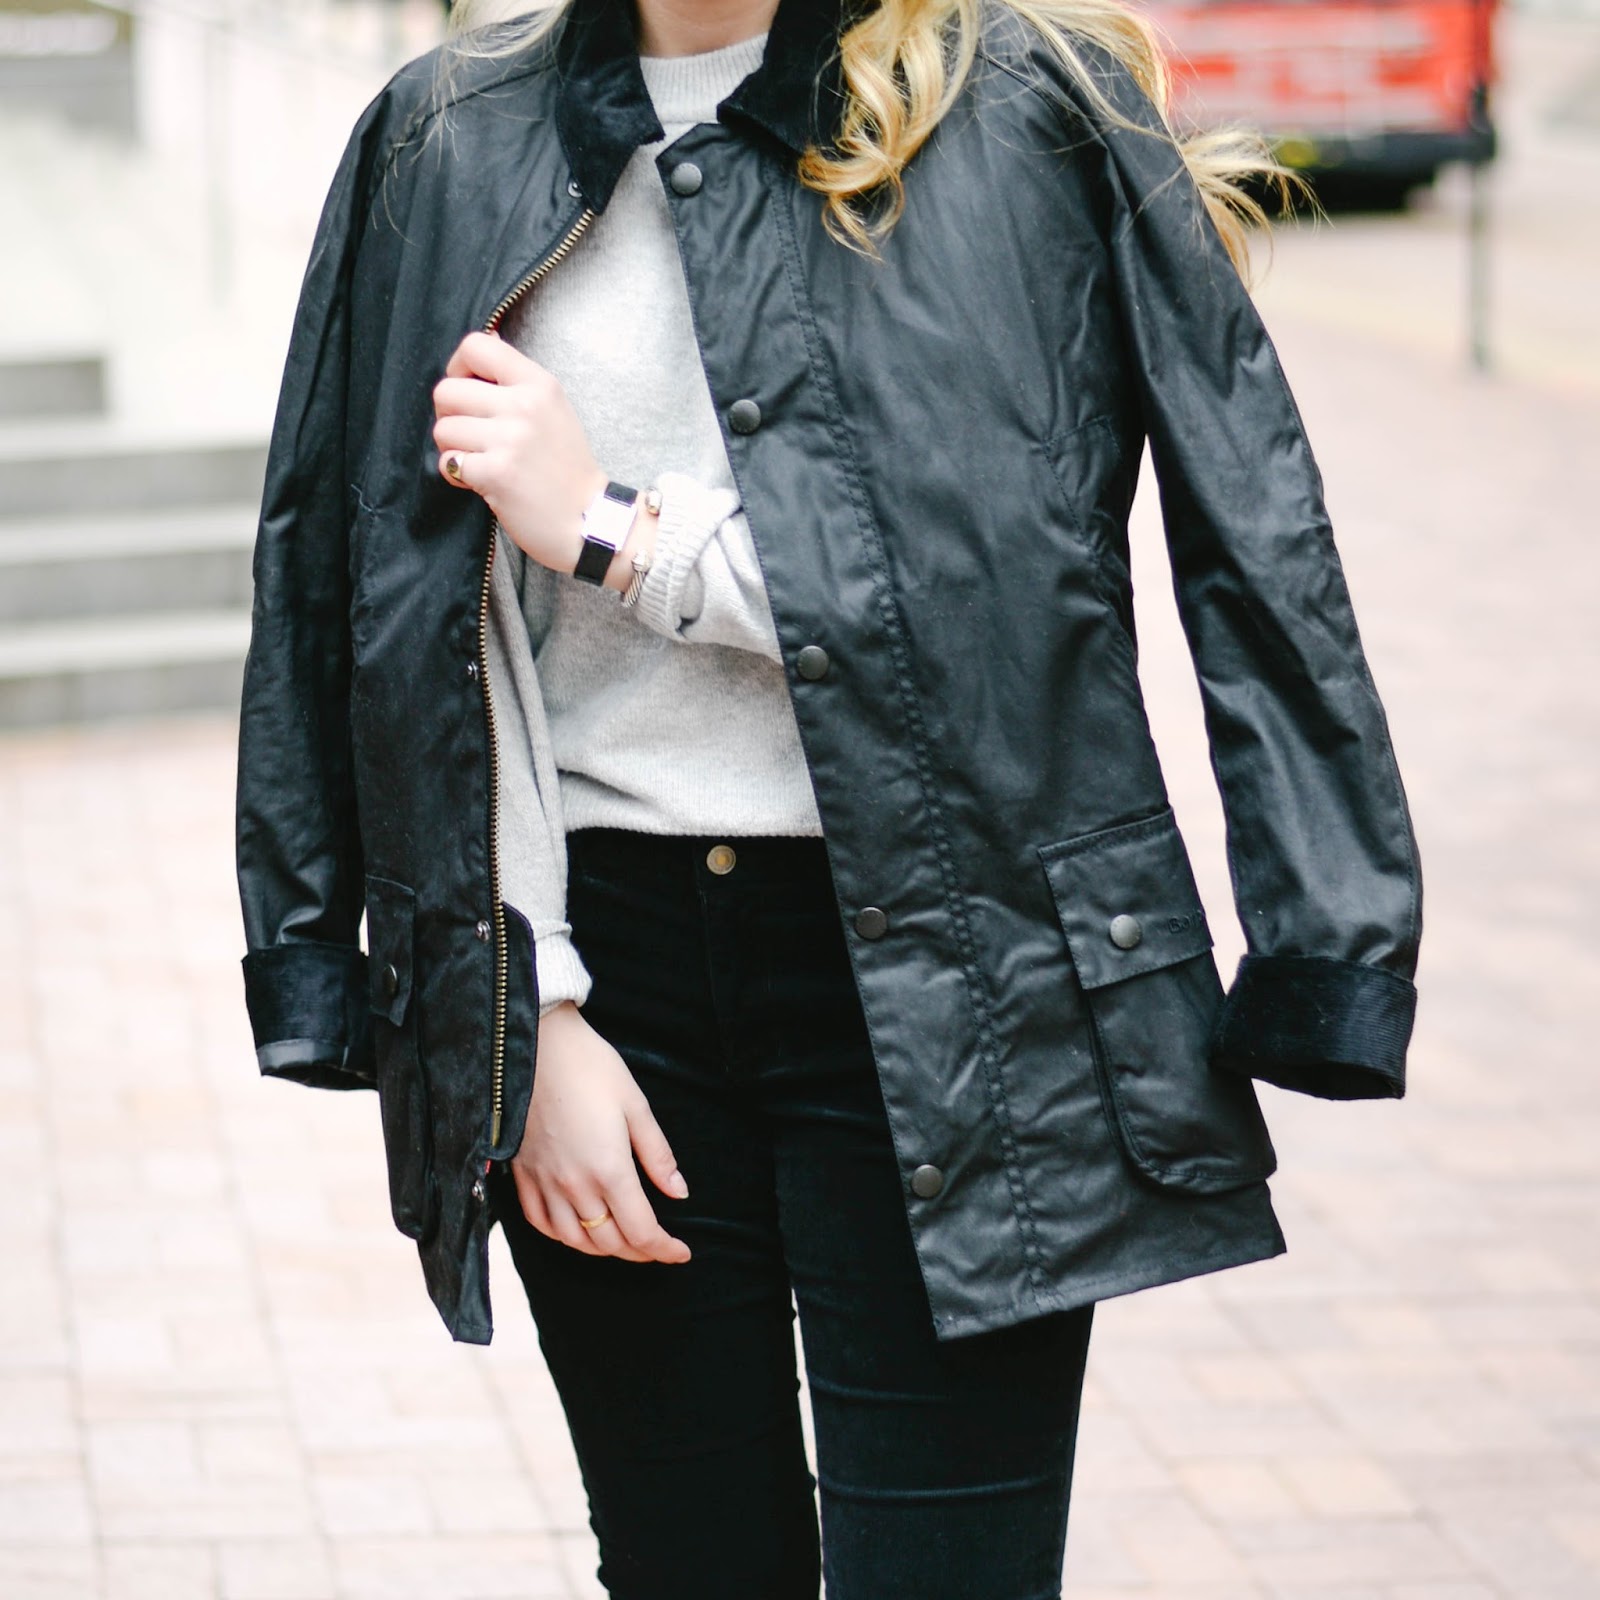 Summer Wind: How to Style a Barbour Jacket in the City